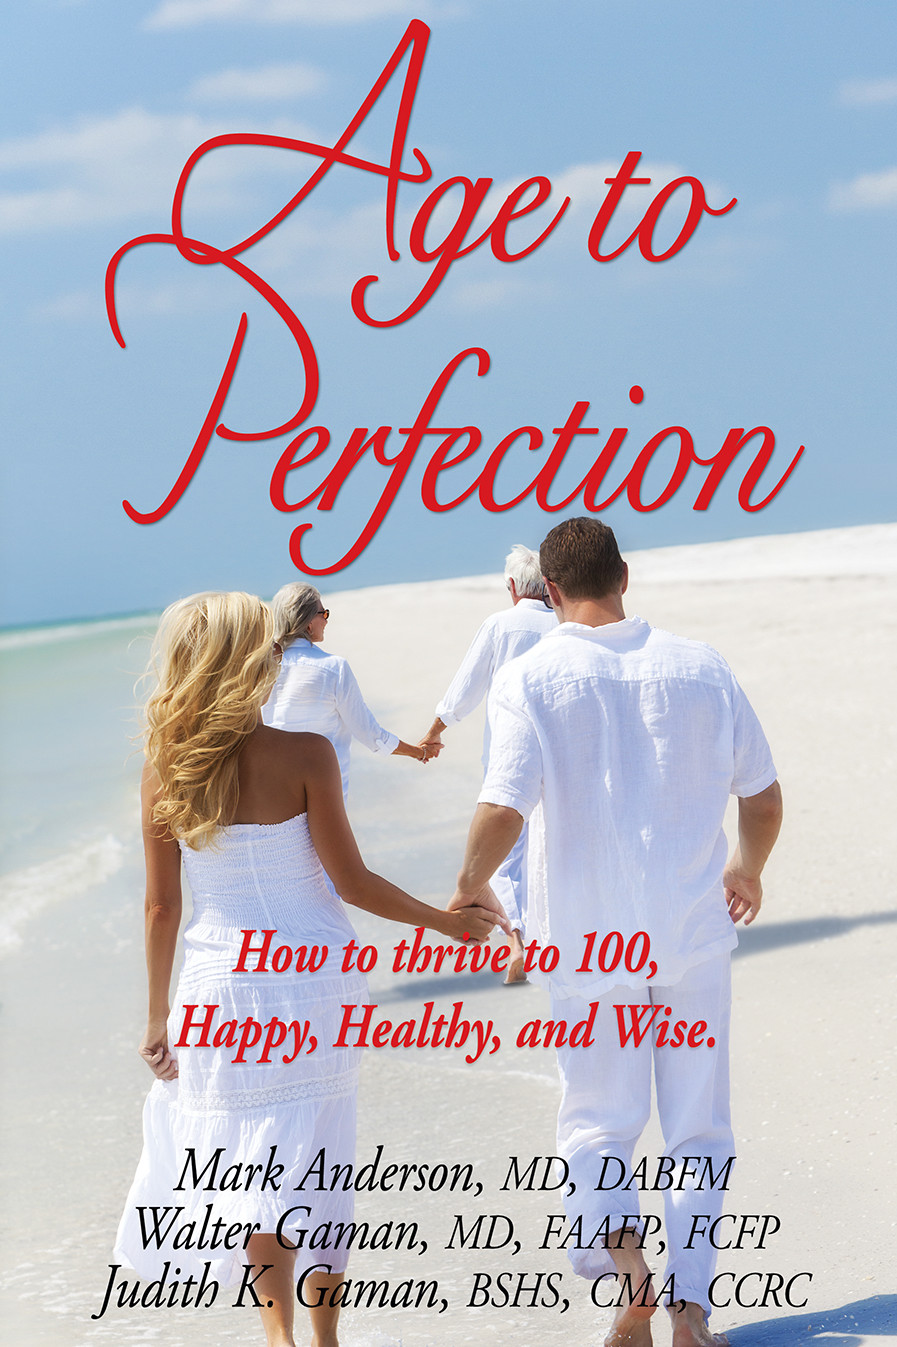 Age to Perfection: How to Thrive to 100, Happy, Healthy, and Wise